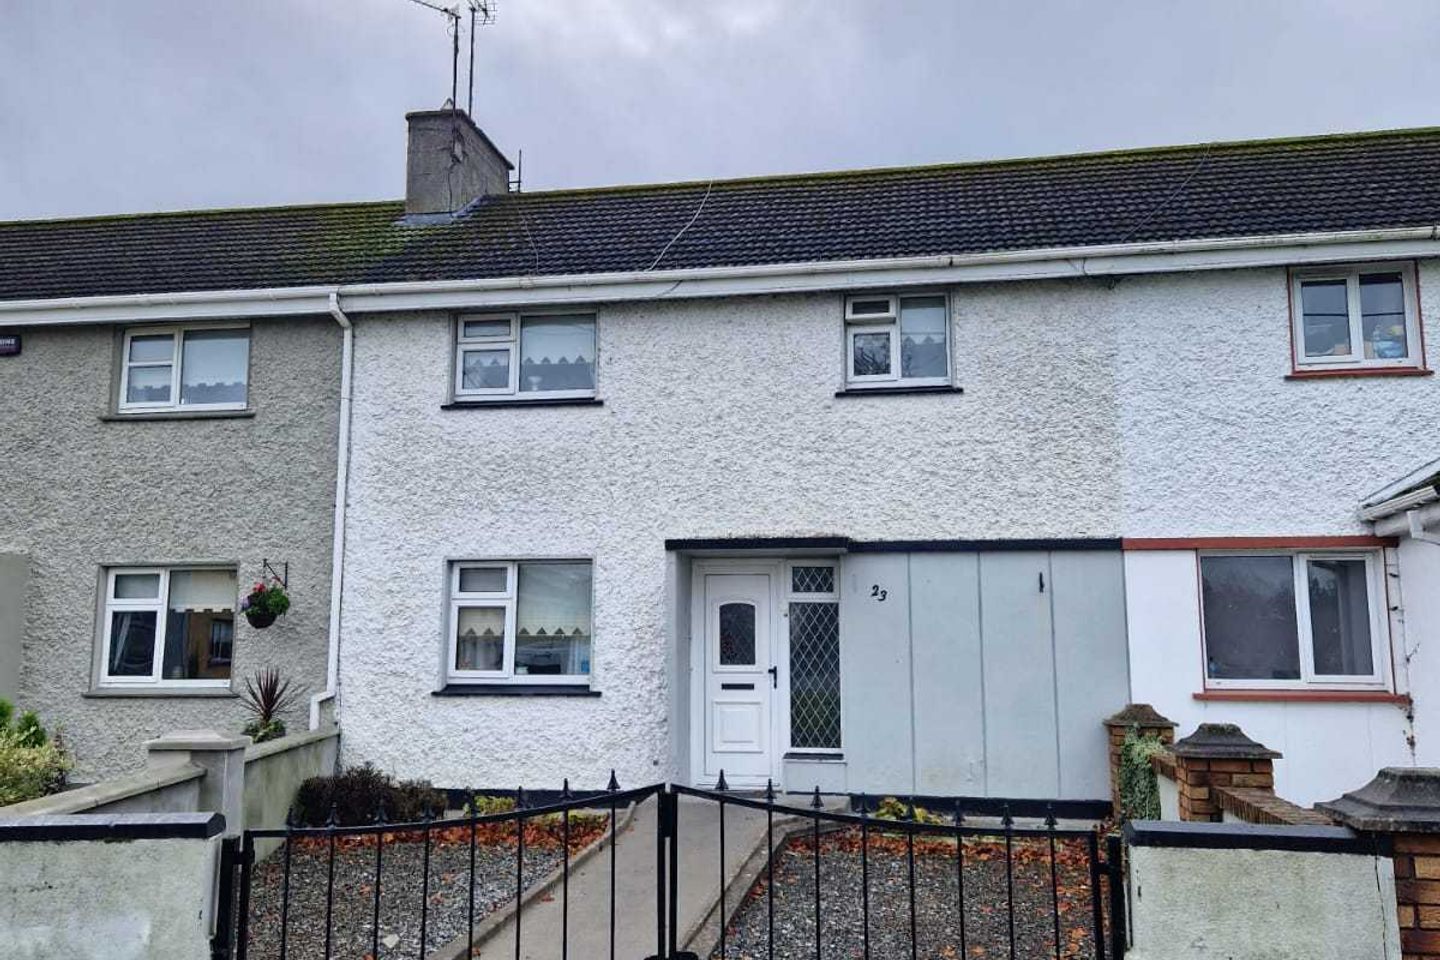 23 Pearse Park, Tullamore, Co. Offaly